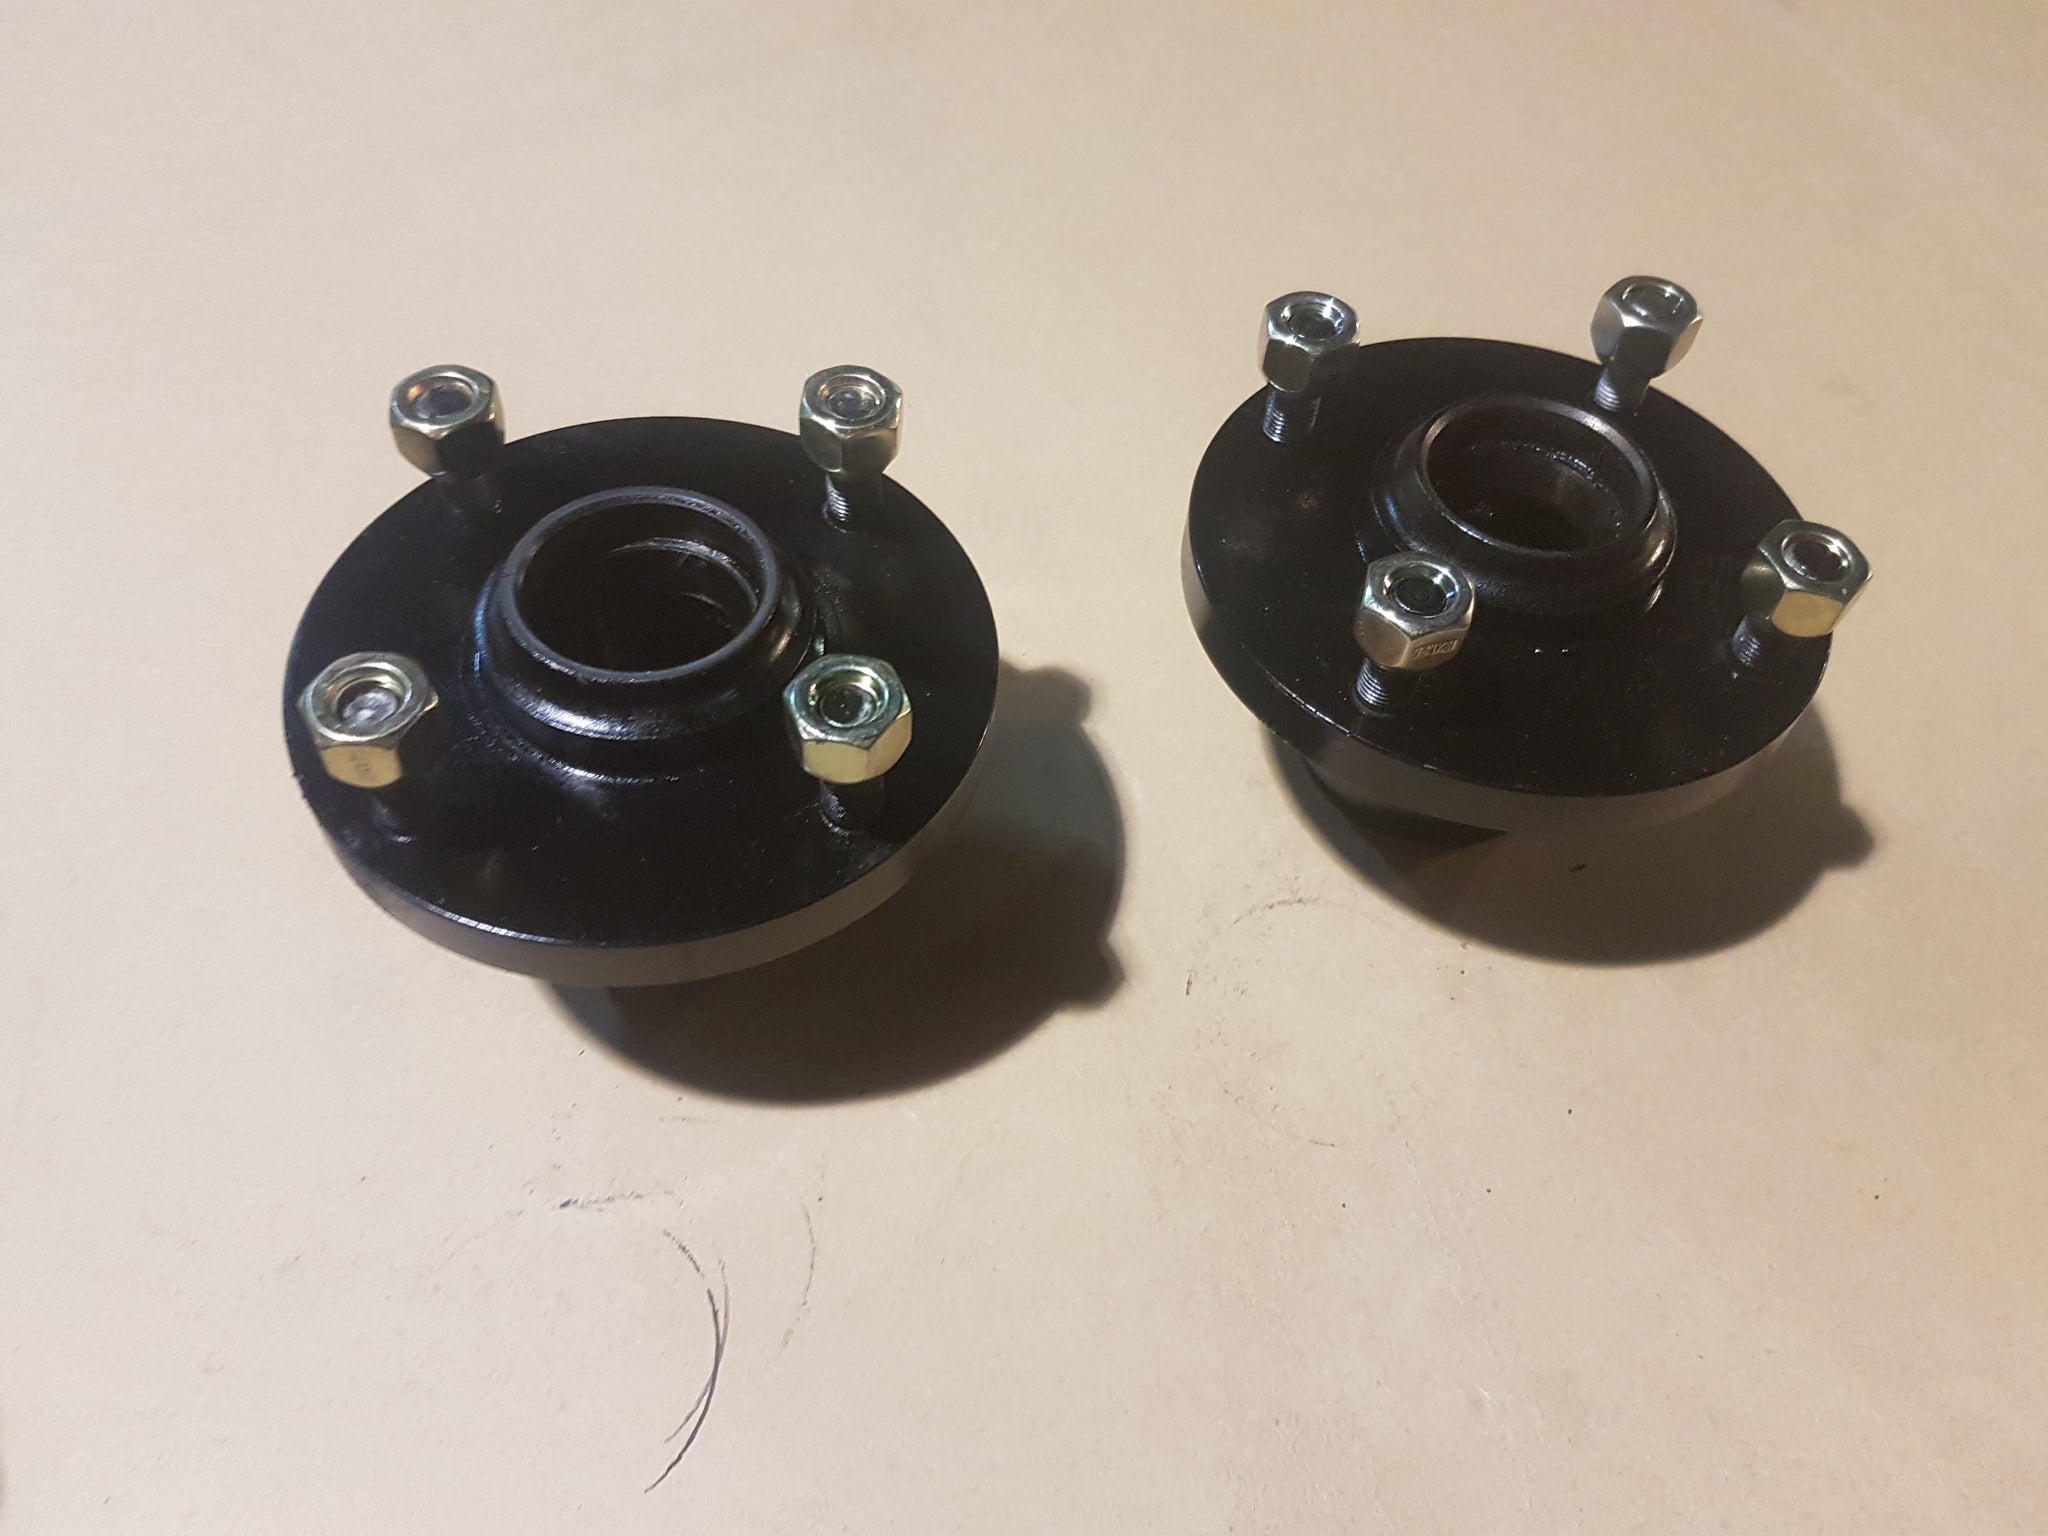 R31 machined hubs for 4 piston front brake conversions